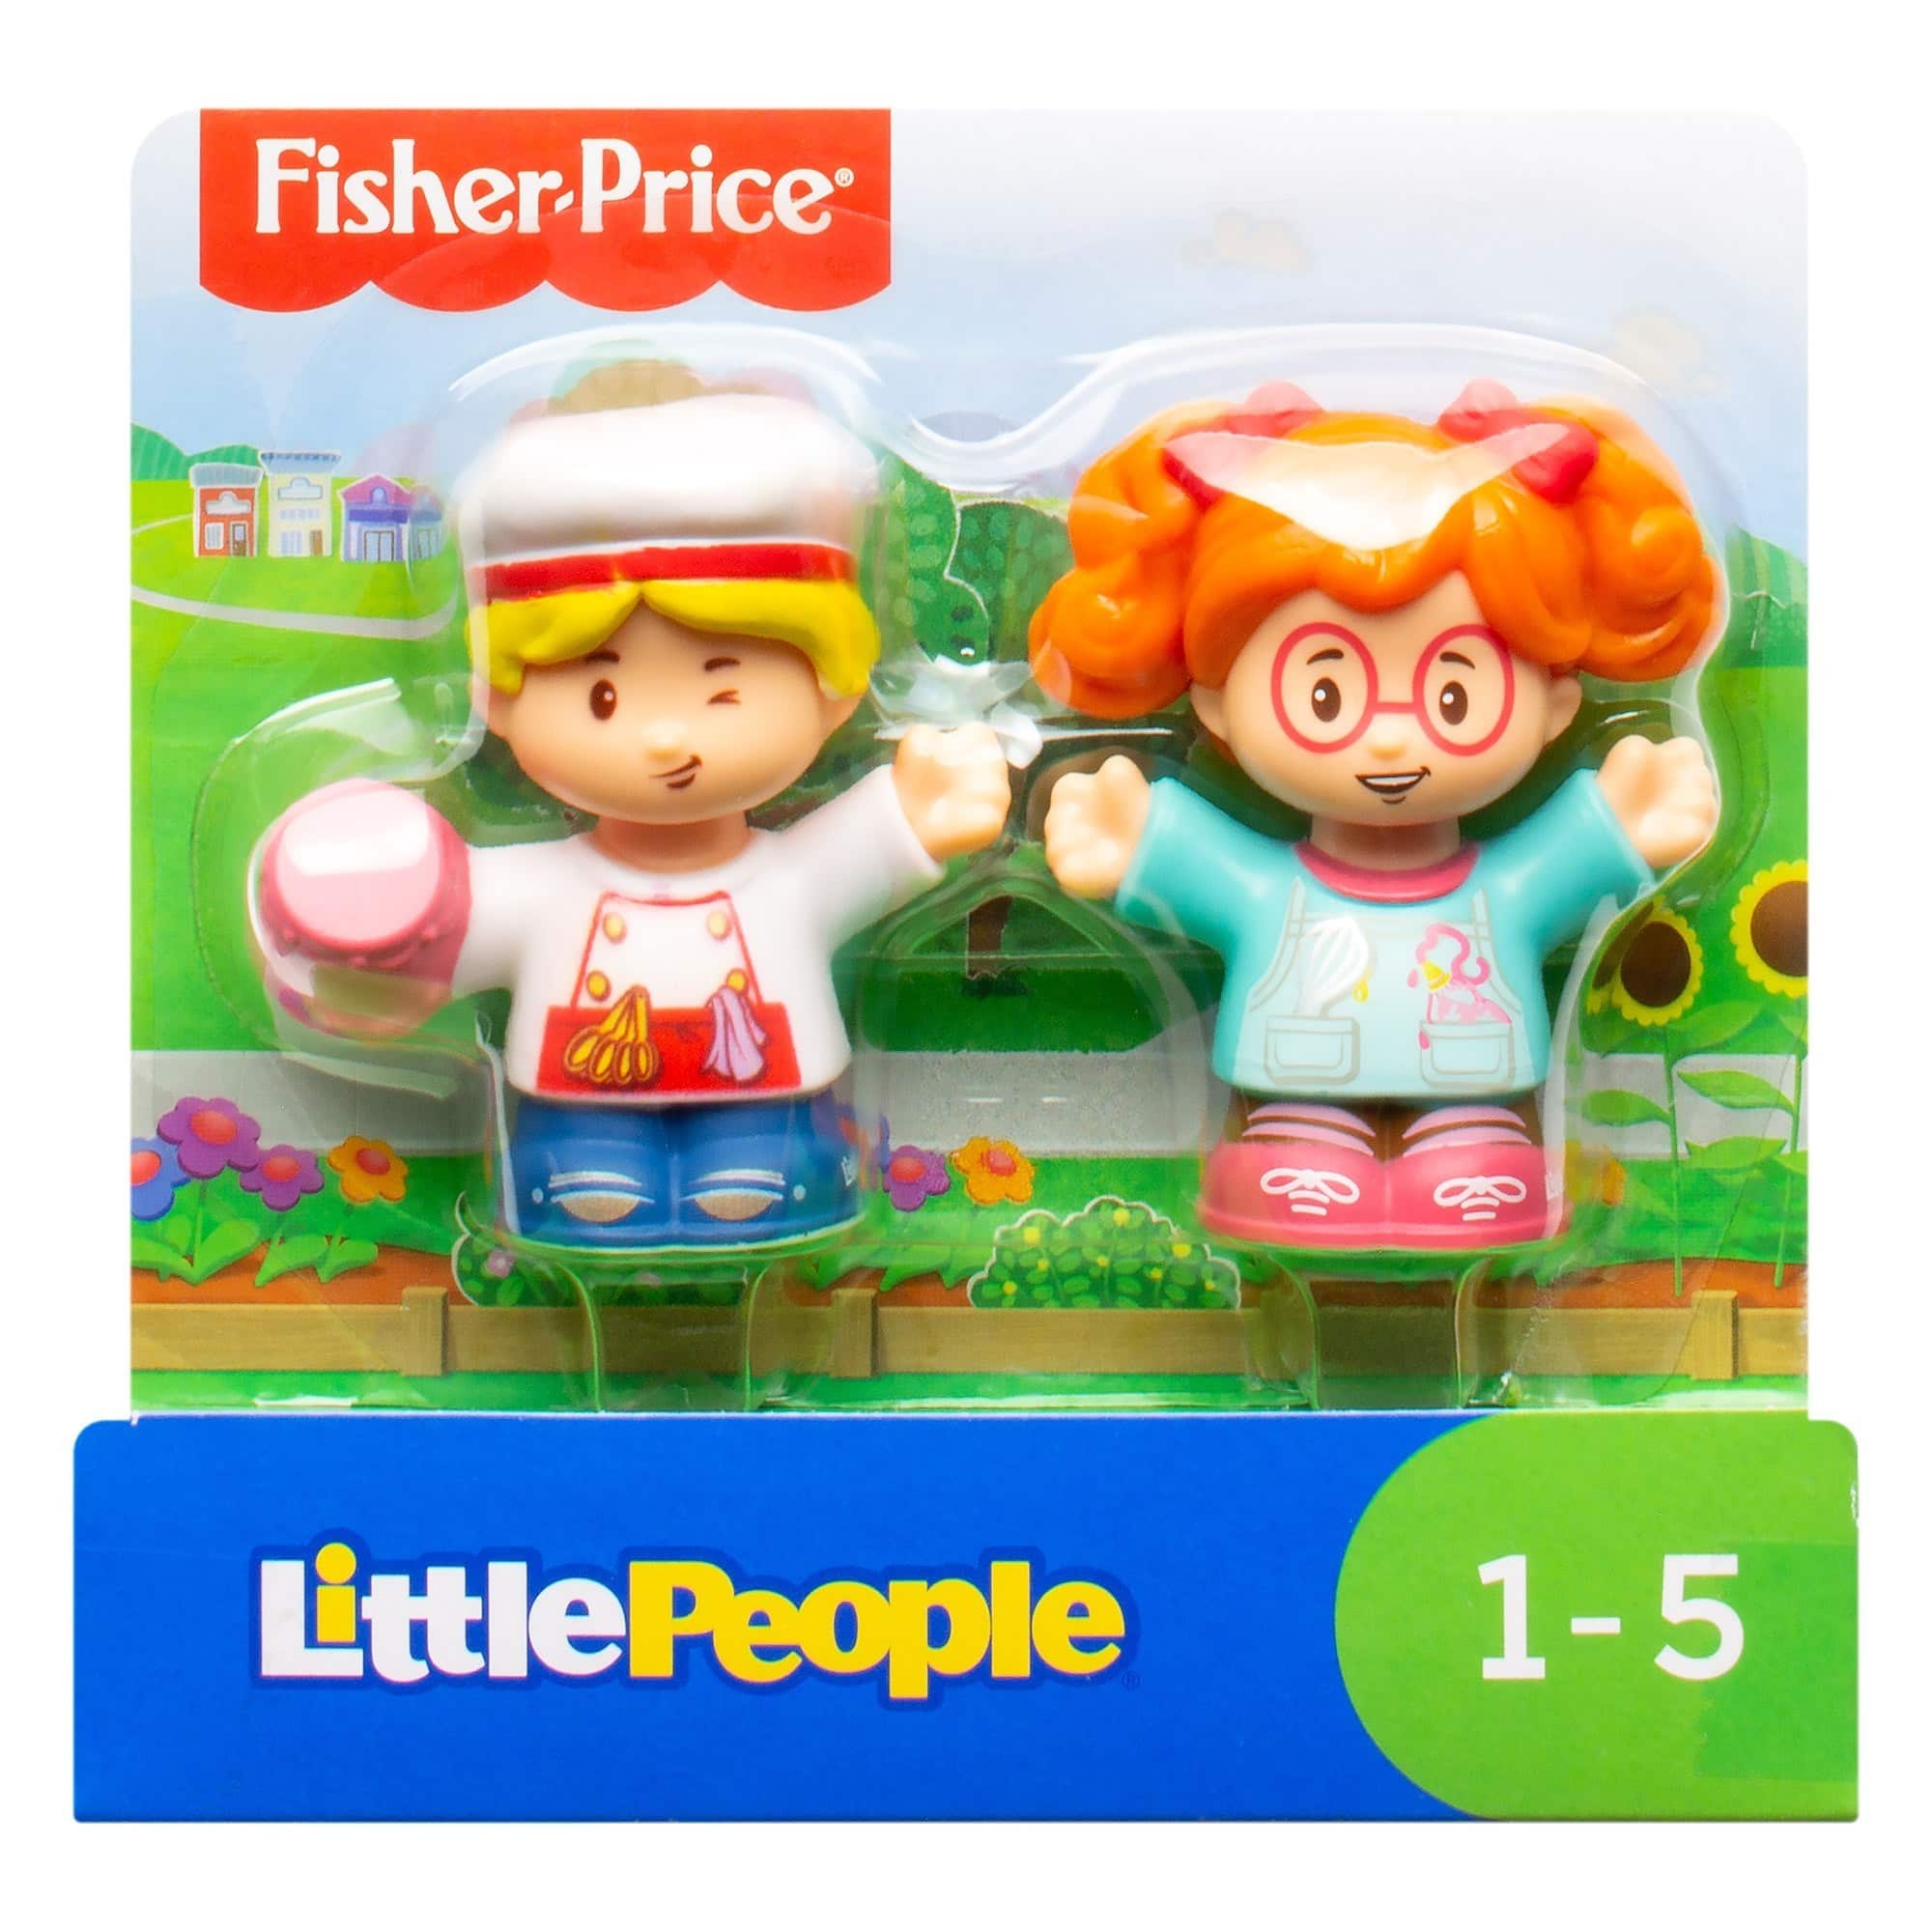 Fisher Price - Little People Figures - Pastry Chef Tia and Sofie